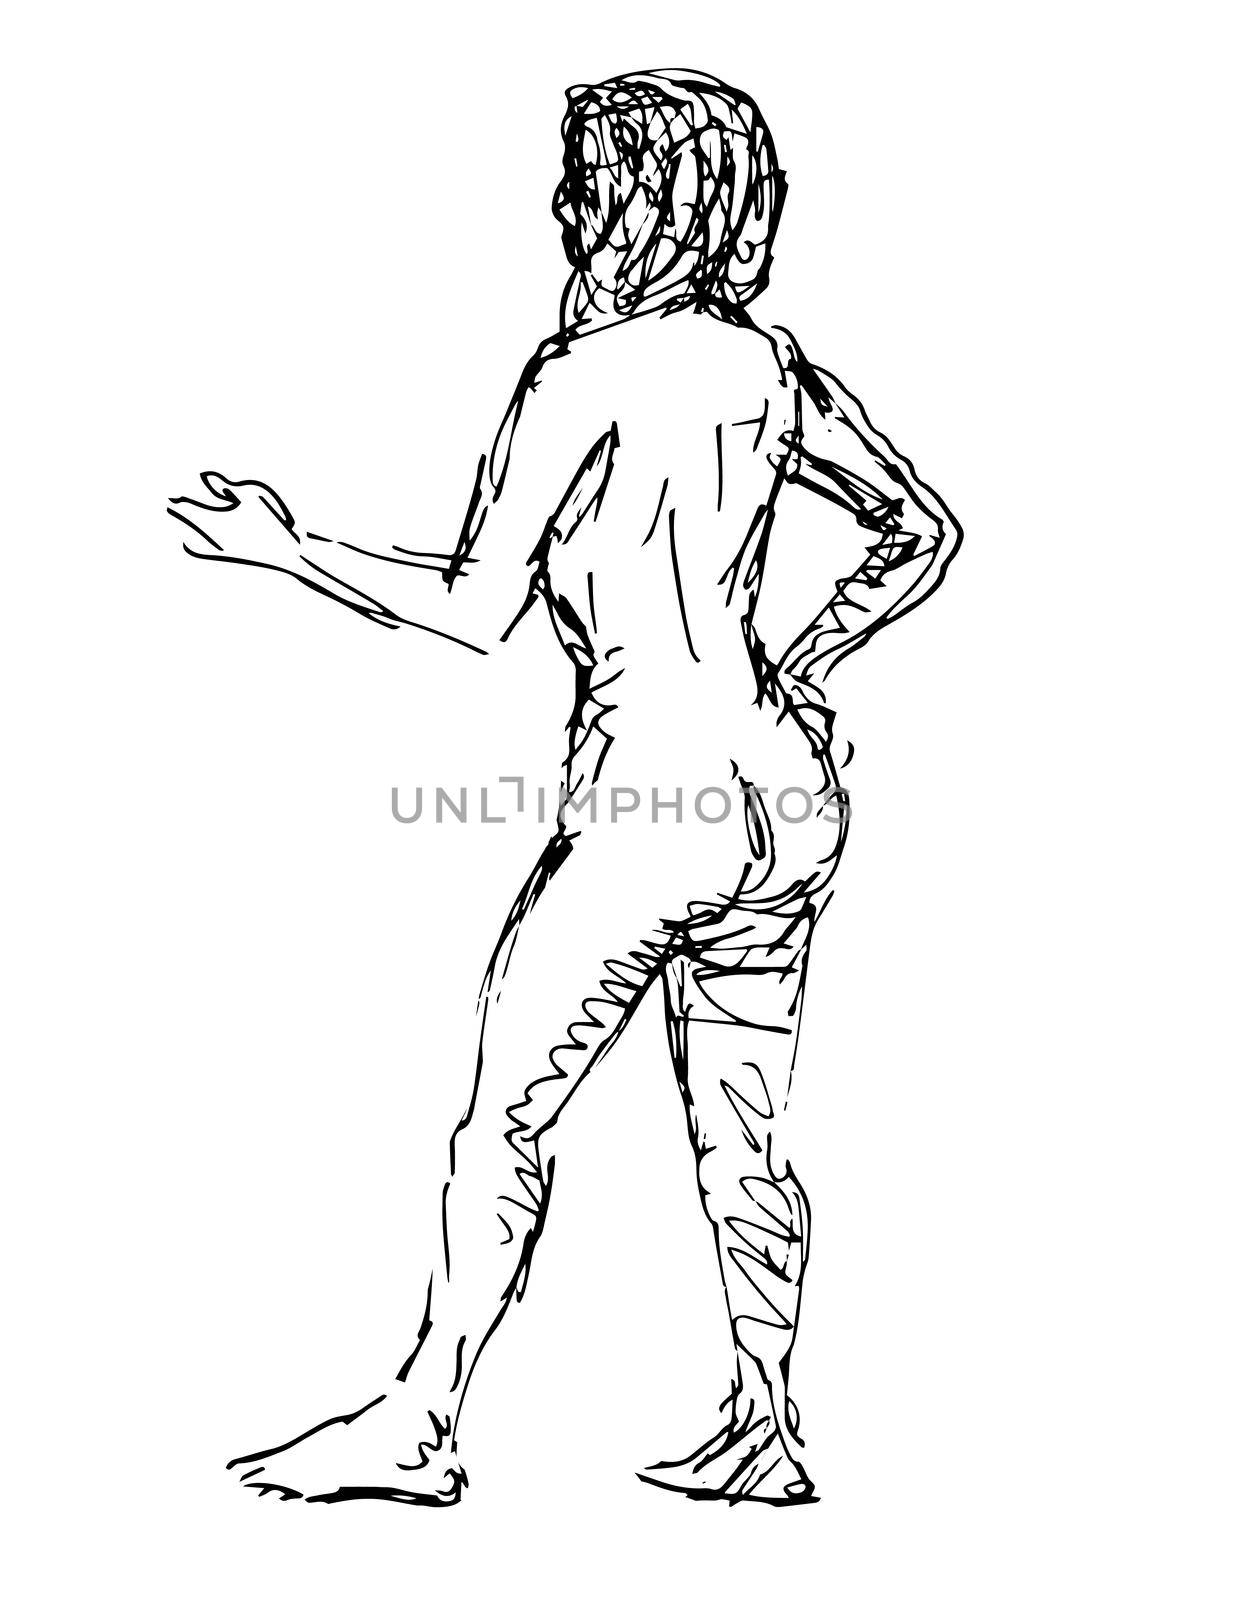 Doodle art illustration of a nude female human figure posing standing hand on hip pointing done in continuous line drawing style in black and white on isolated background.